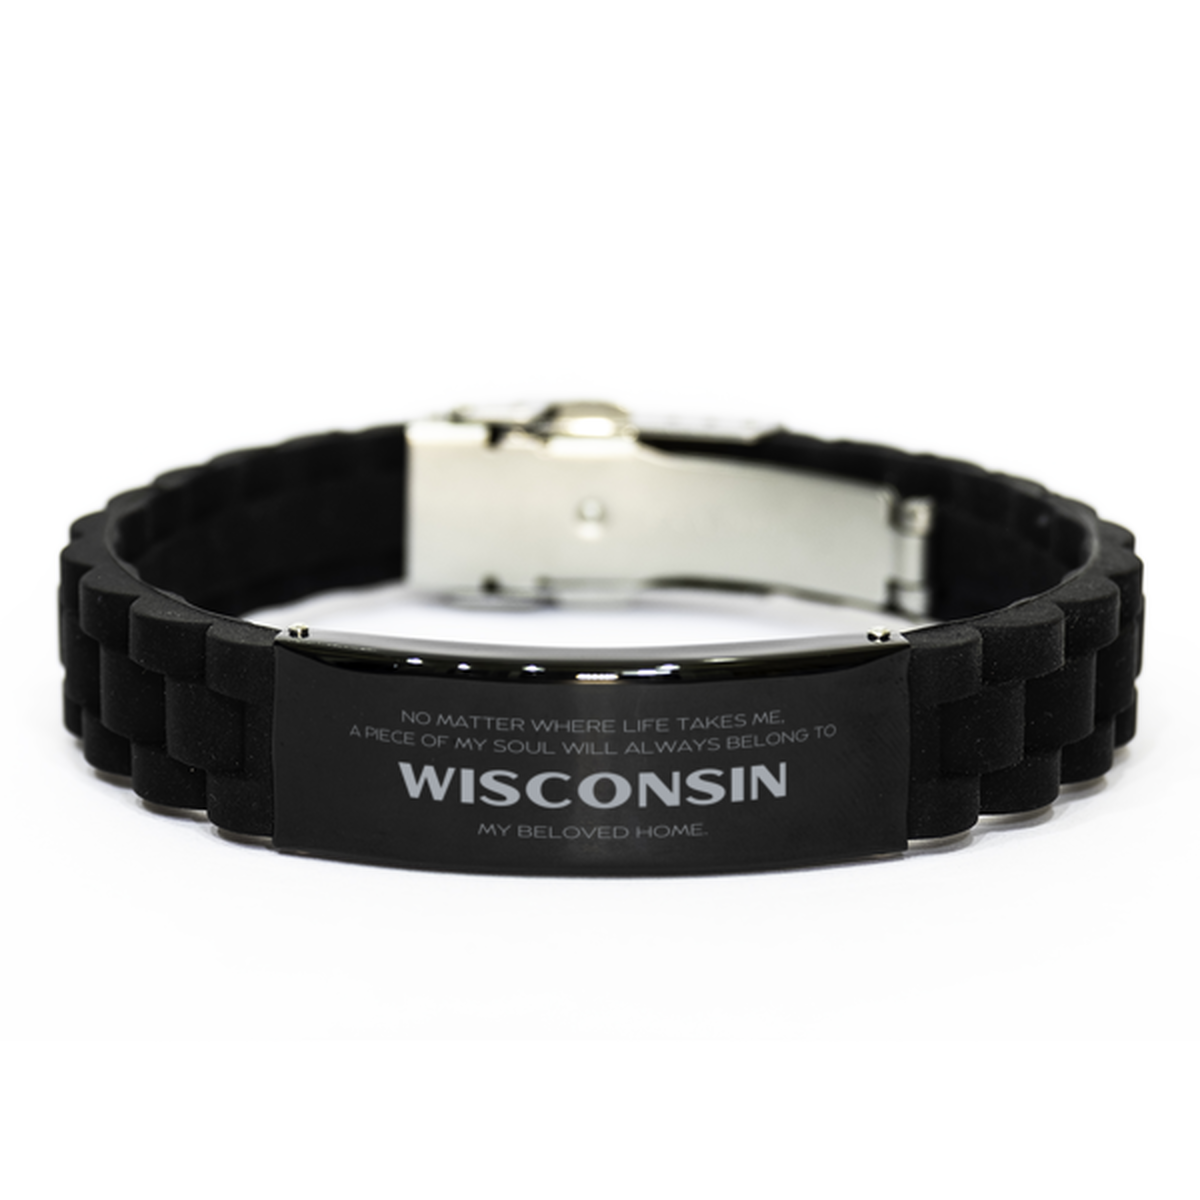 Love Wisconsin State Gifts, My soul will always belong to Wisconsin, Proud Black Glidelock Clasp Bracelet, Birthday Unique Gifts For Wisconsin Men, Women, Friends